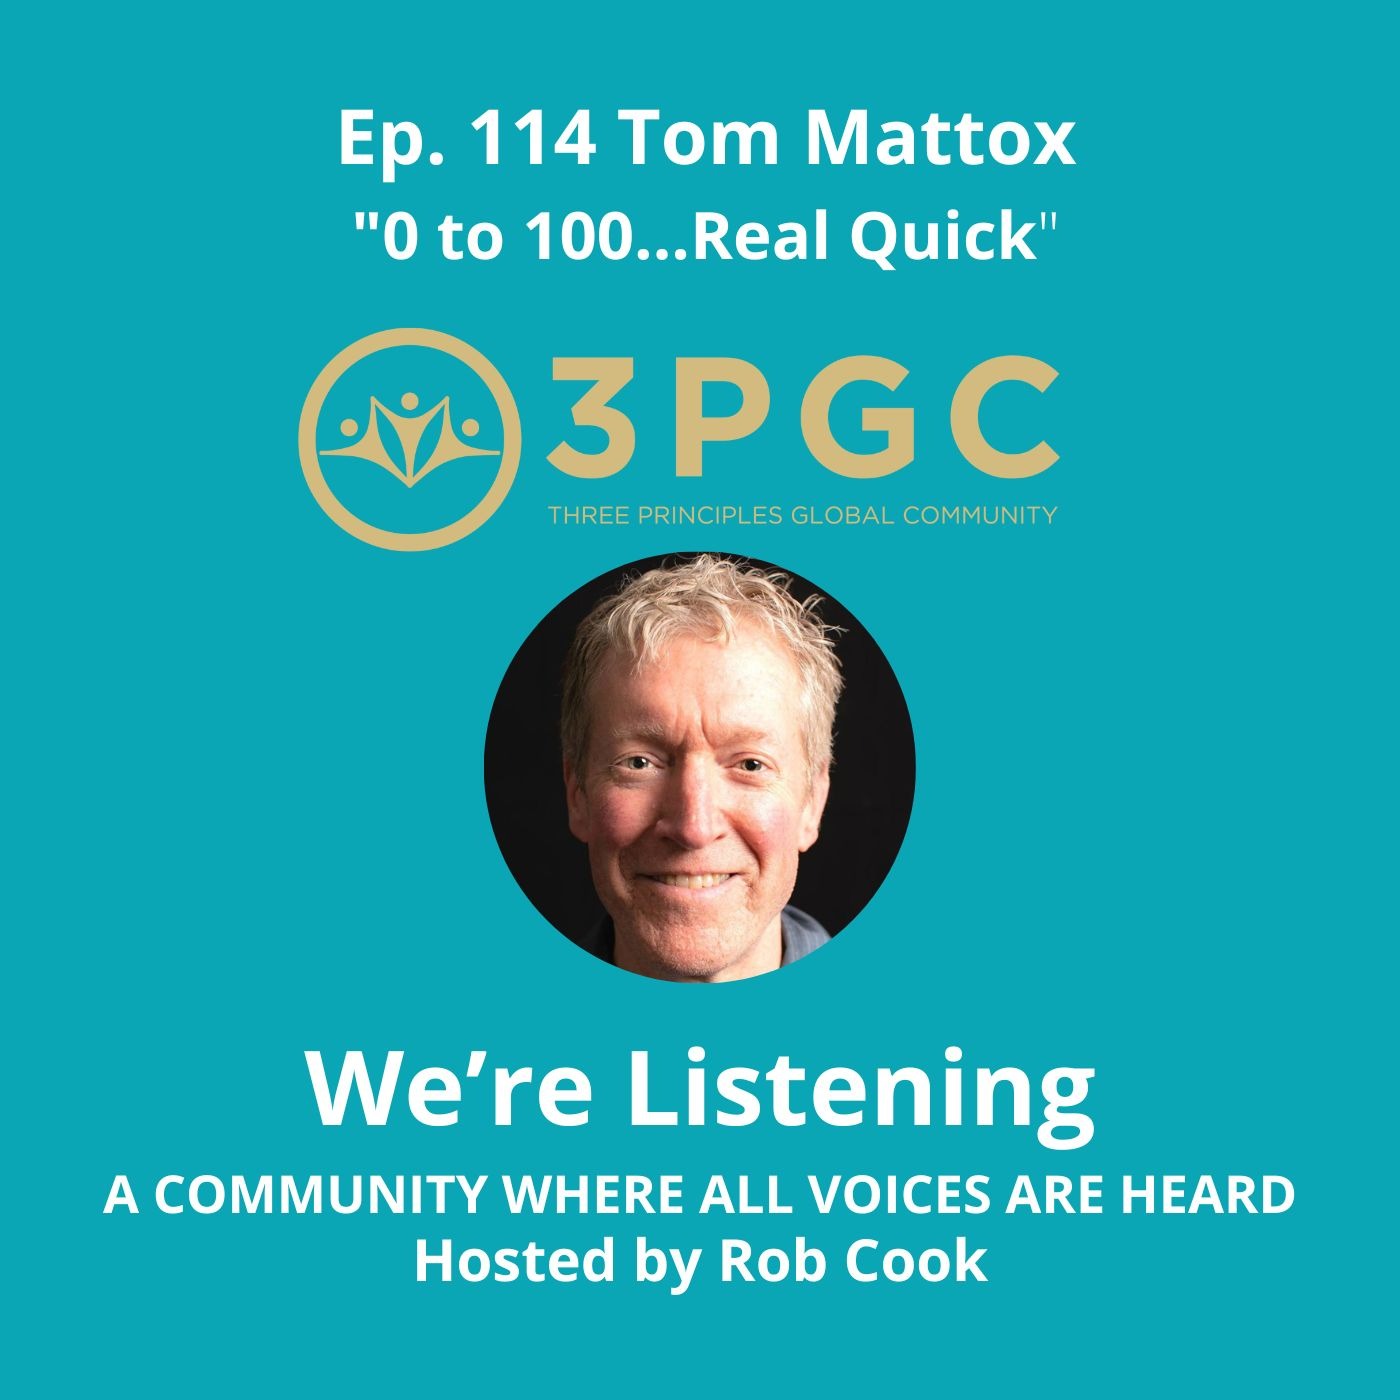 Ep. 114 Tom Mattox “0 to 100 Real Quick”